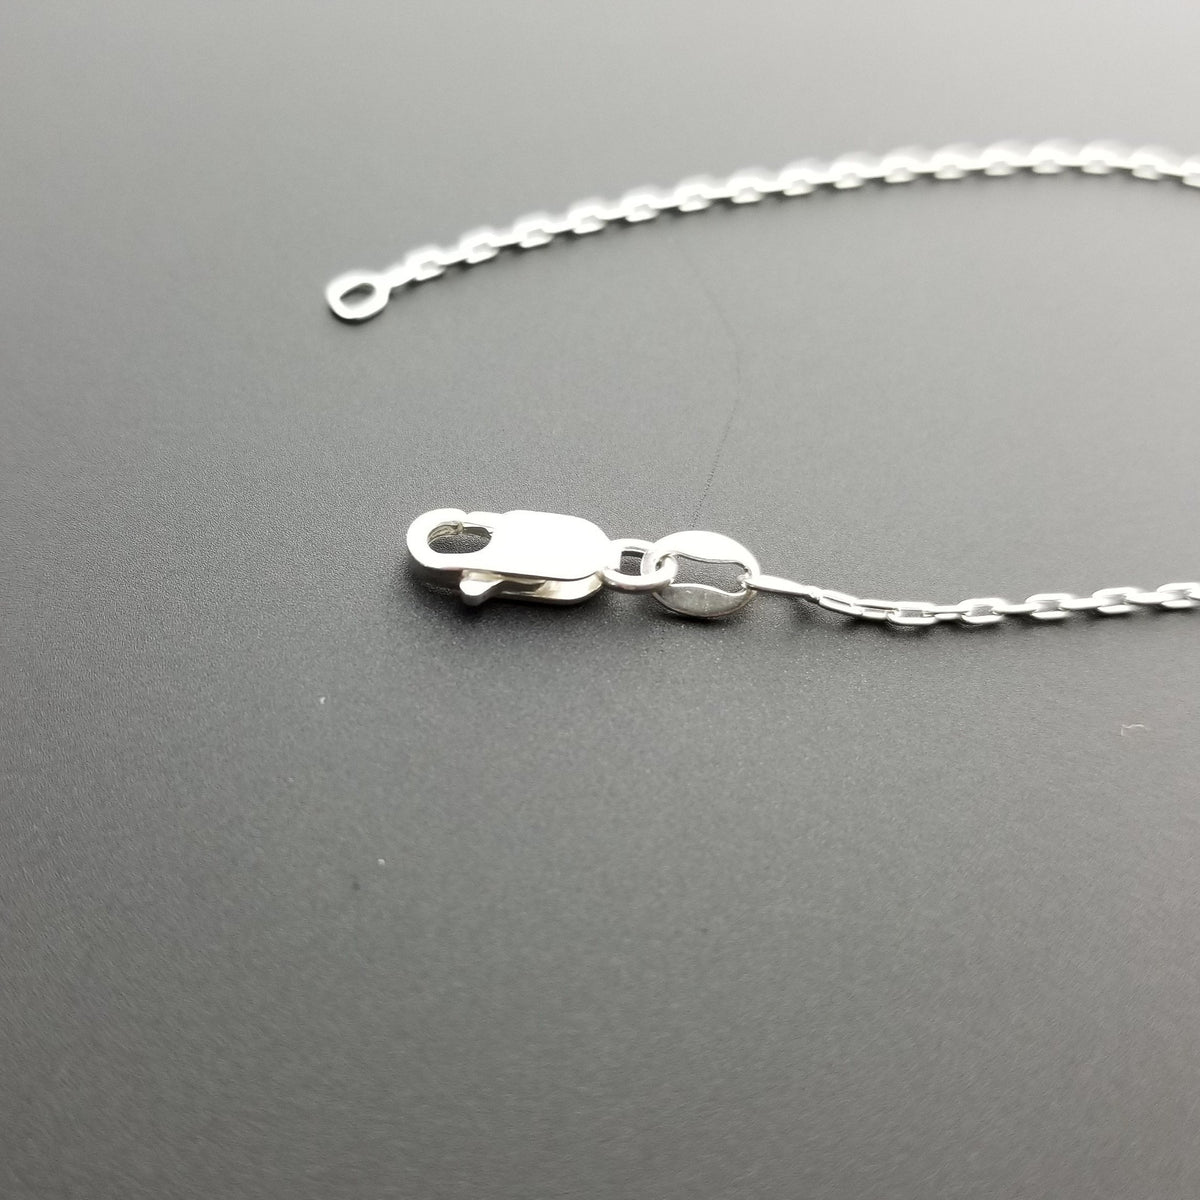 Catch detail in silver chain